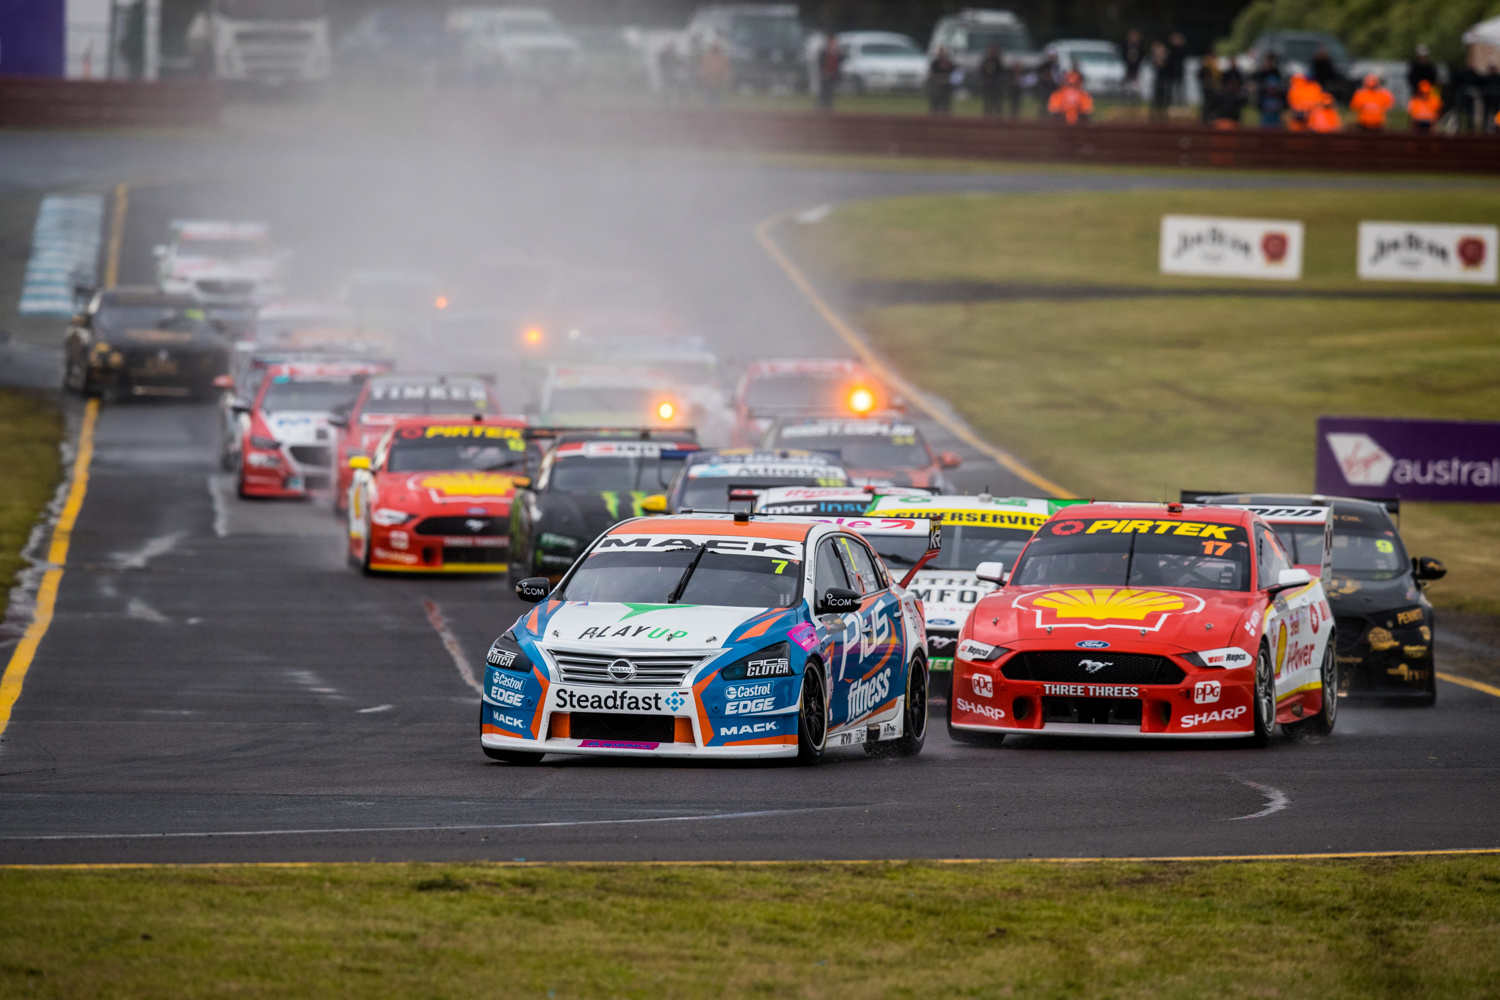 Qualifying sprints will not be back when the Sandown 500 returns in 2023